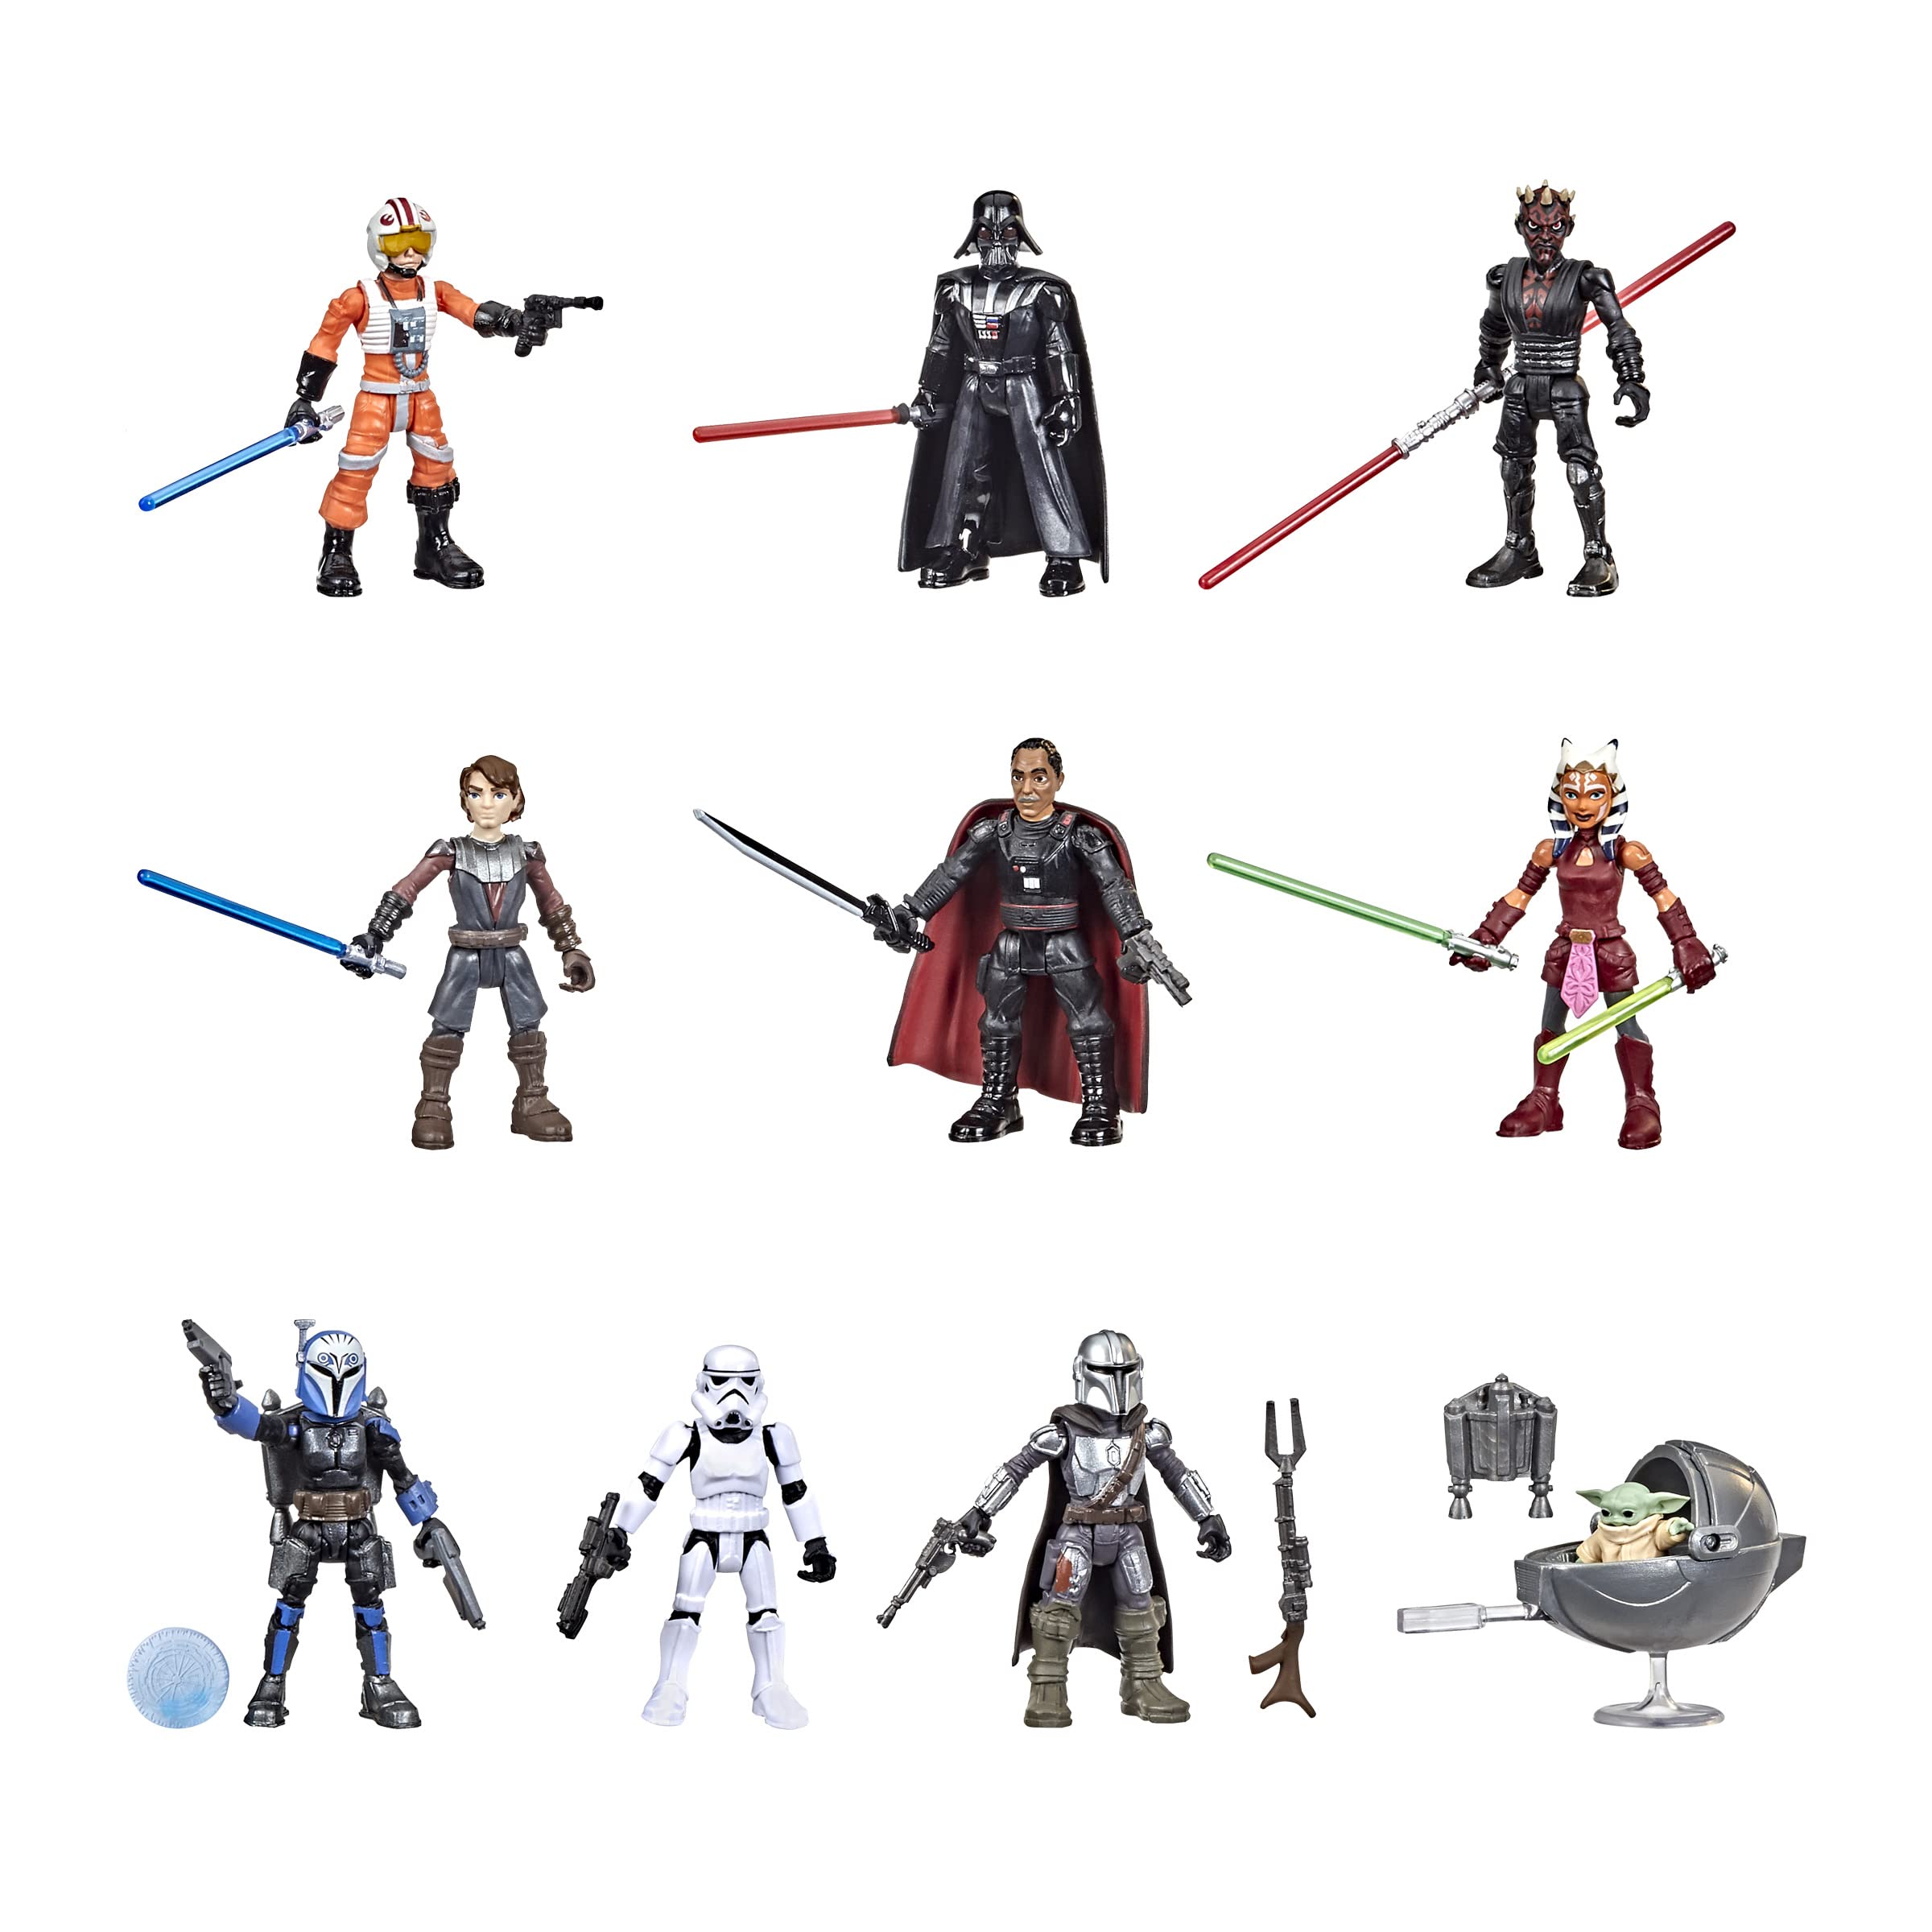 STAR WARS Toys Mission Fleet 2.5-Inch-Scale Action Figure 10-Pack, 19 Accessories, with Darth Vader, Luke Skywalker and Grogu, Ages 4 and Up (Amazon Exclusive)